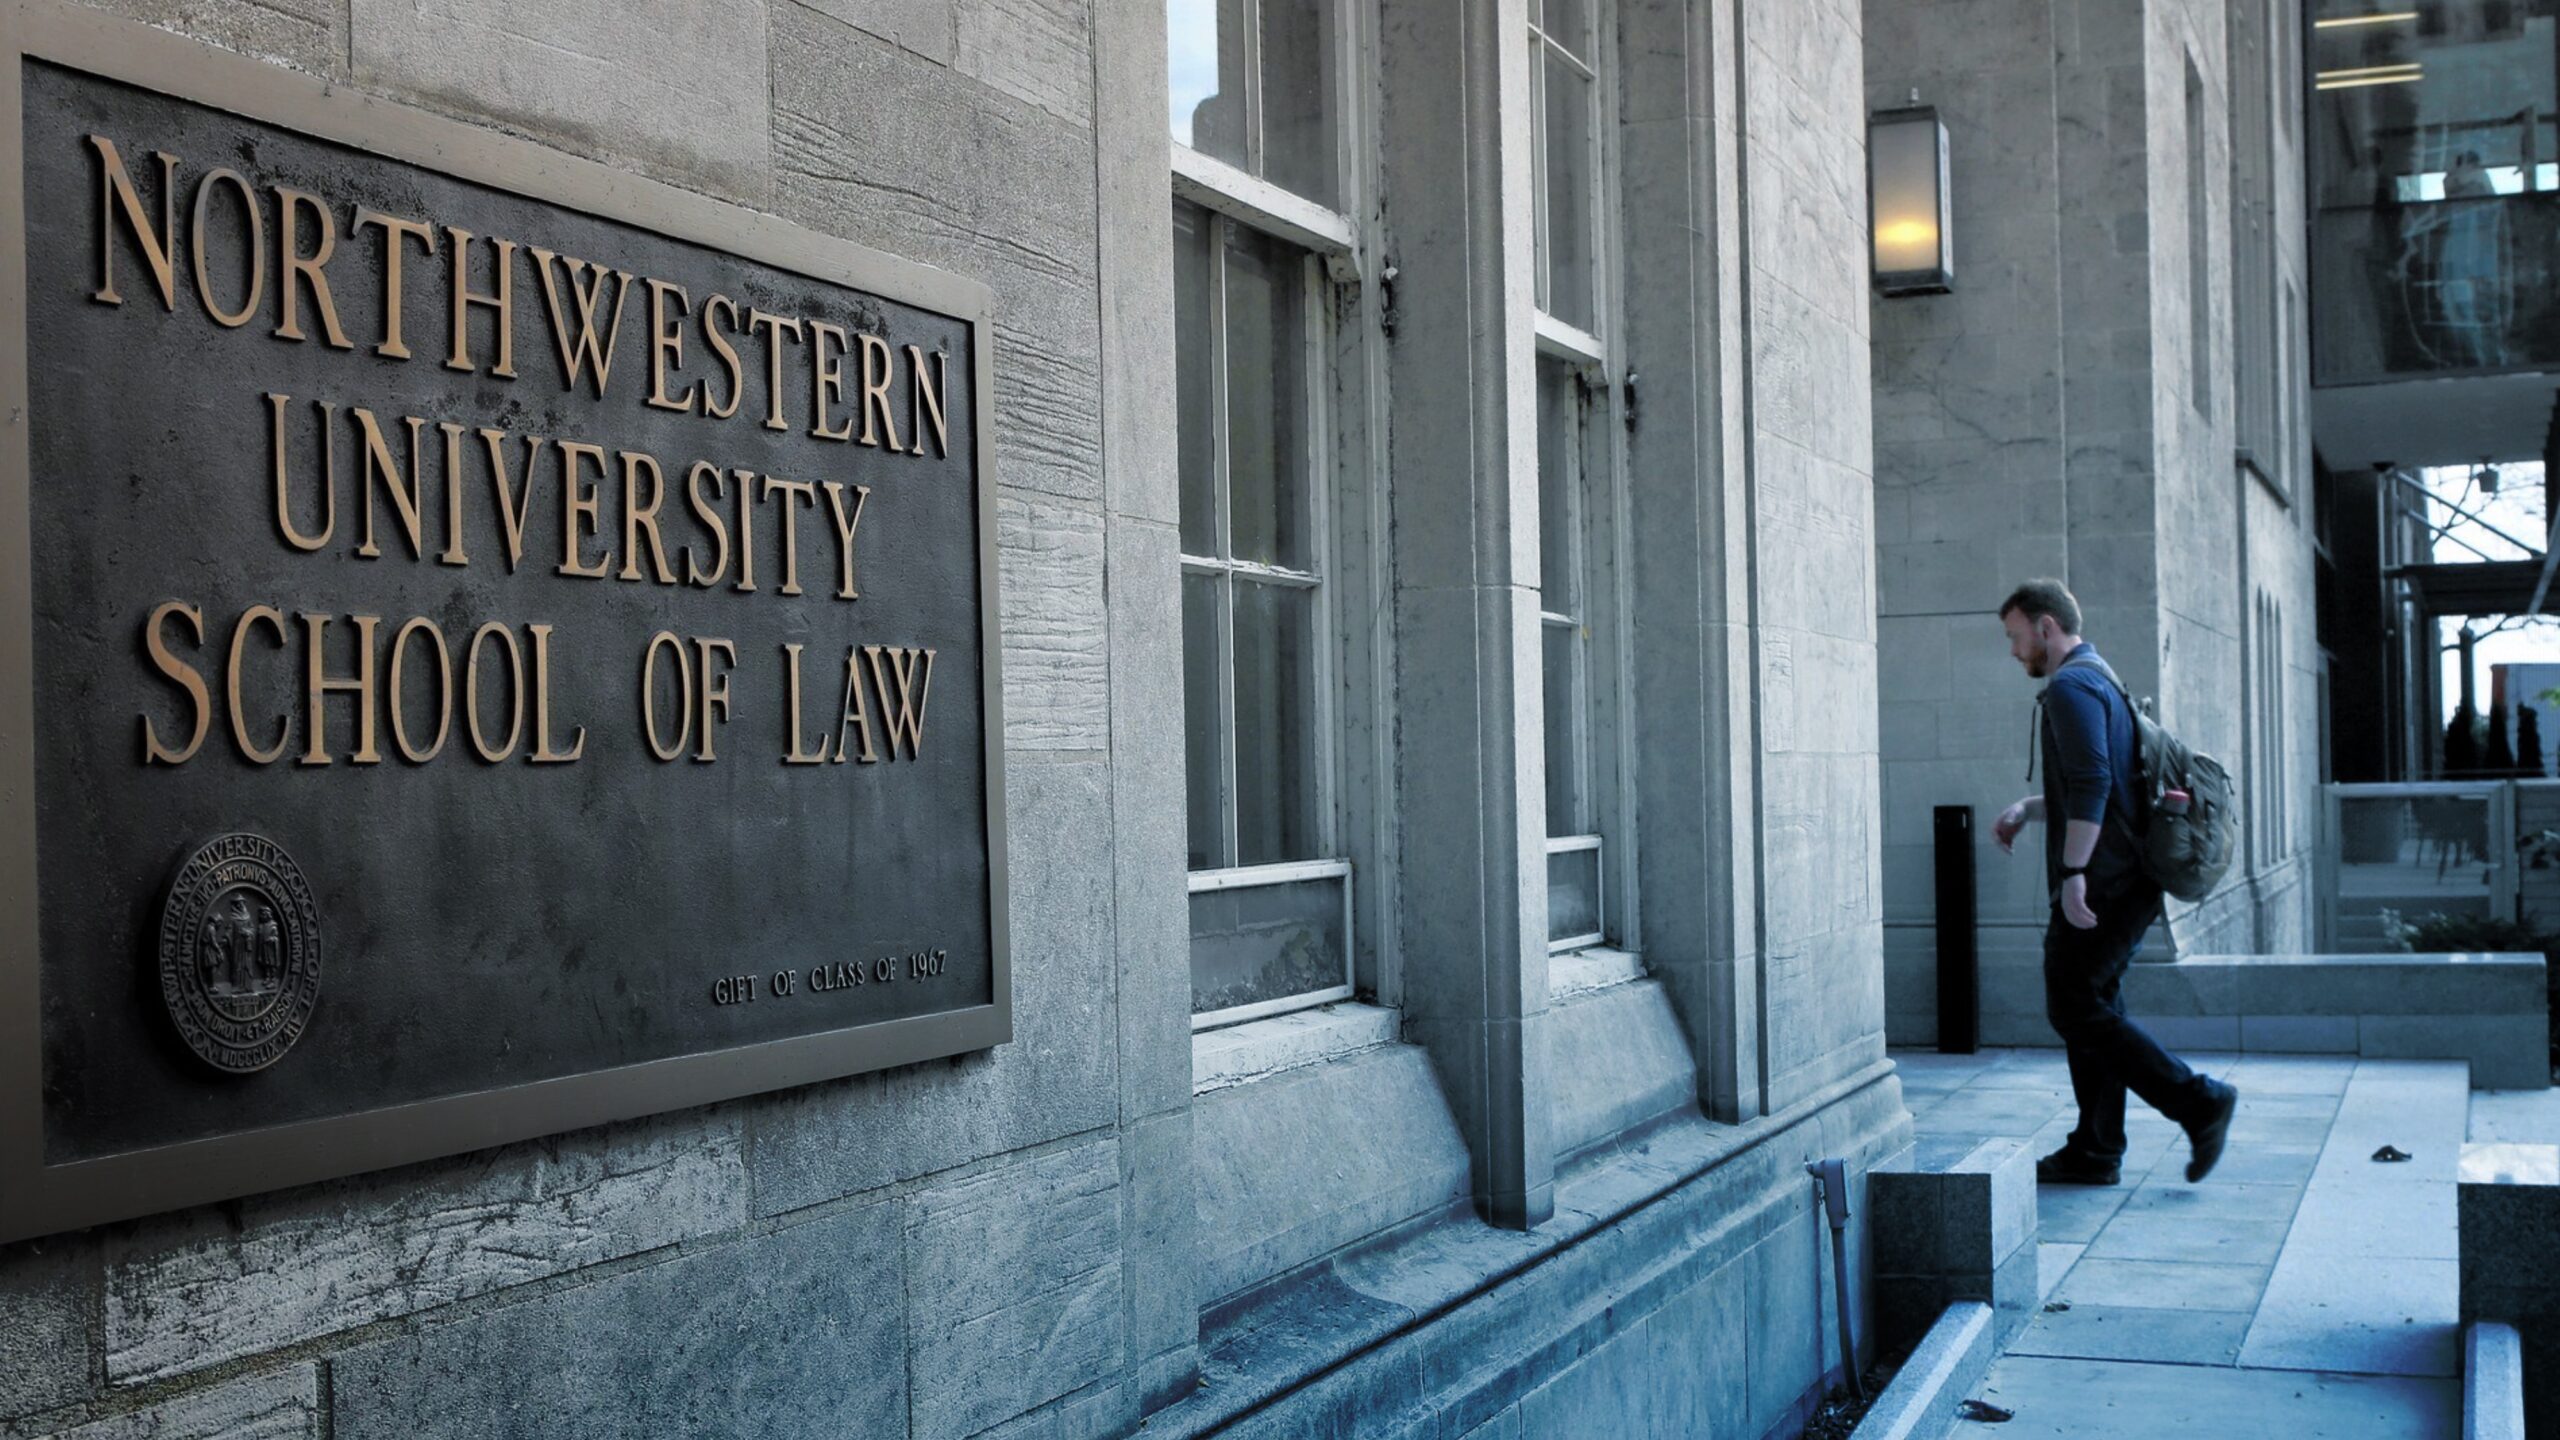 'Woke' Northwestern Law Faculty Introduced Themselves as Racists on Online Townhall - Harbingers Daily